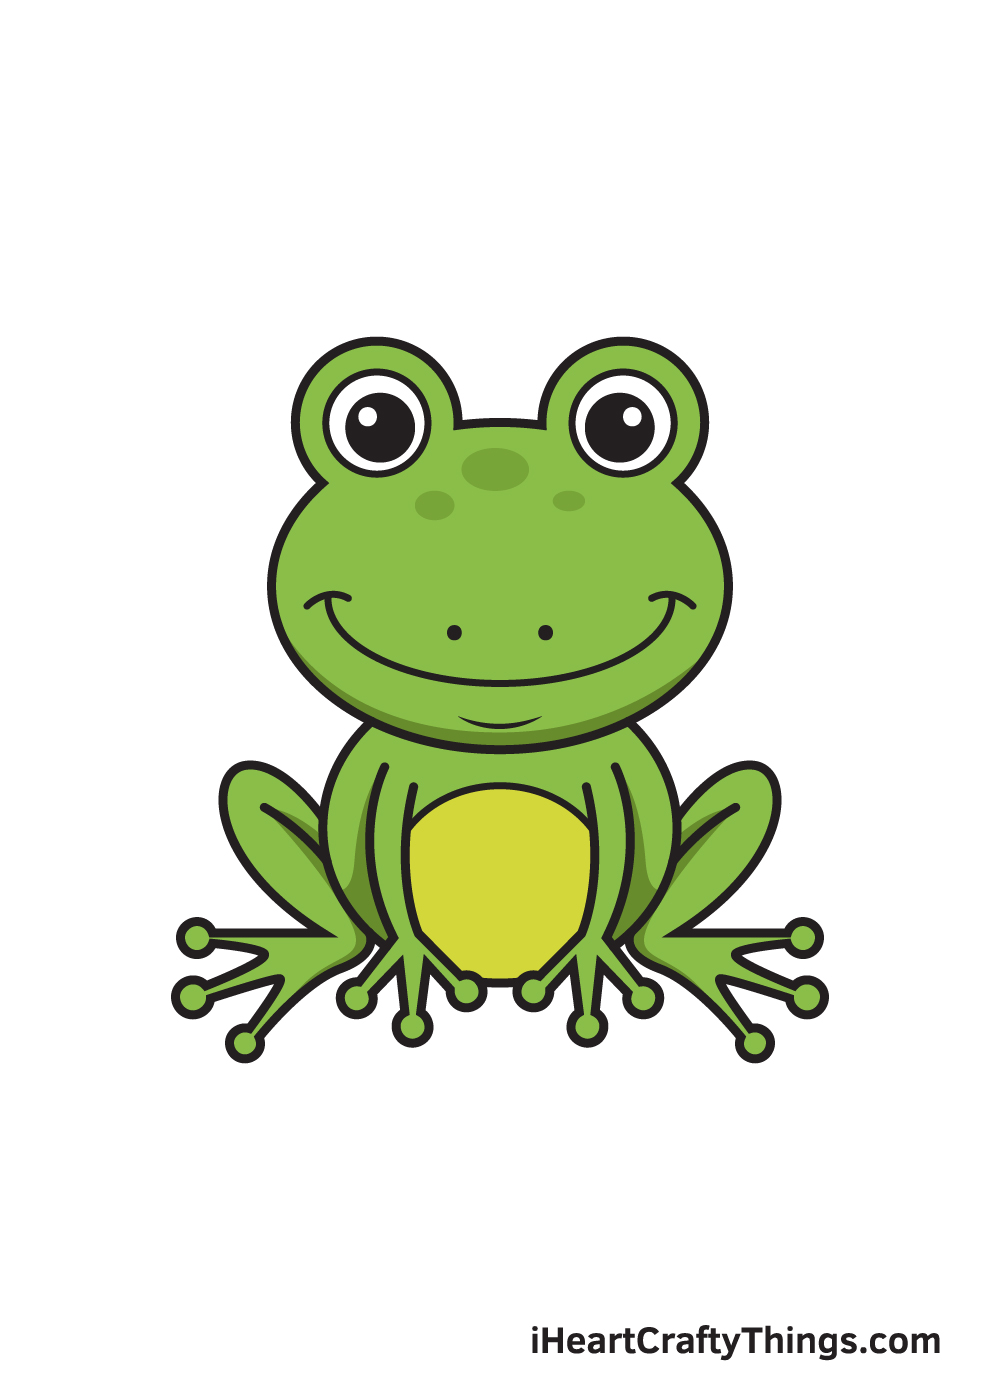 Frog Drawing – 9 Steps